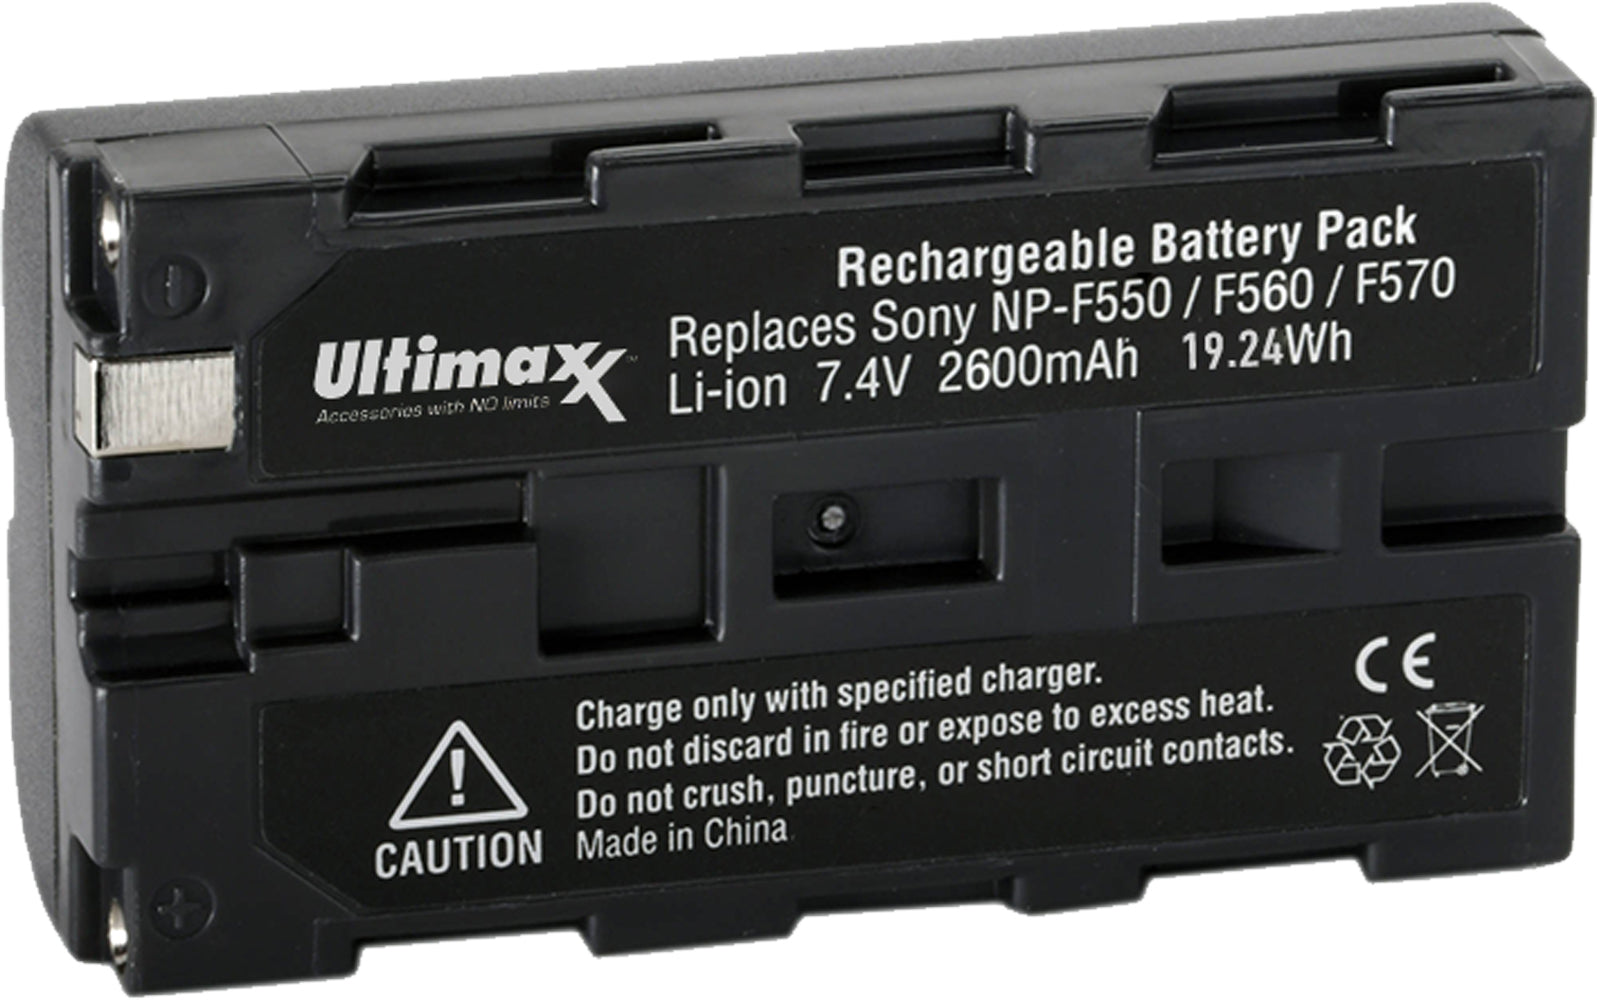 Ultimaxx Replacement Battery for Sony F550/F560/F570 - 2600 mAh